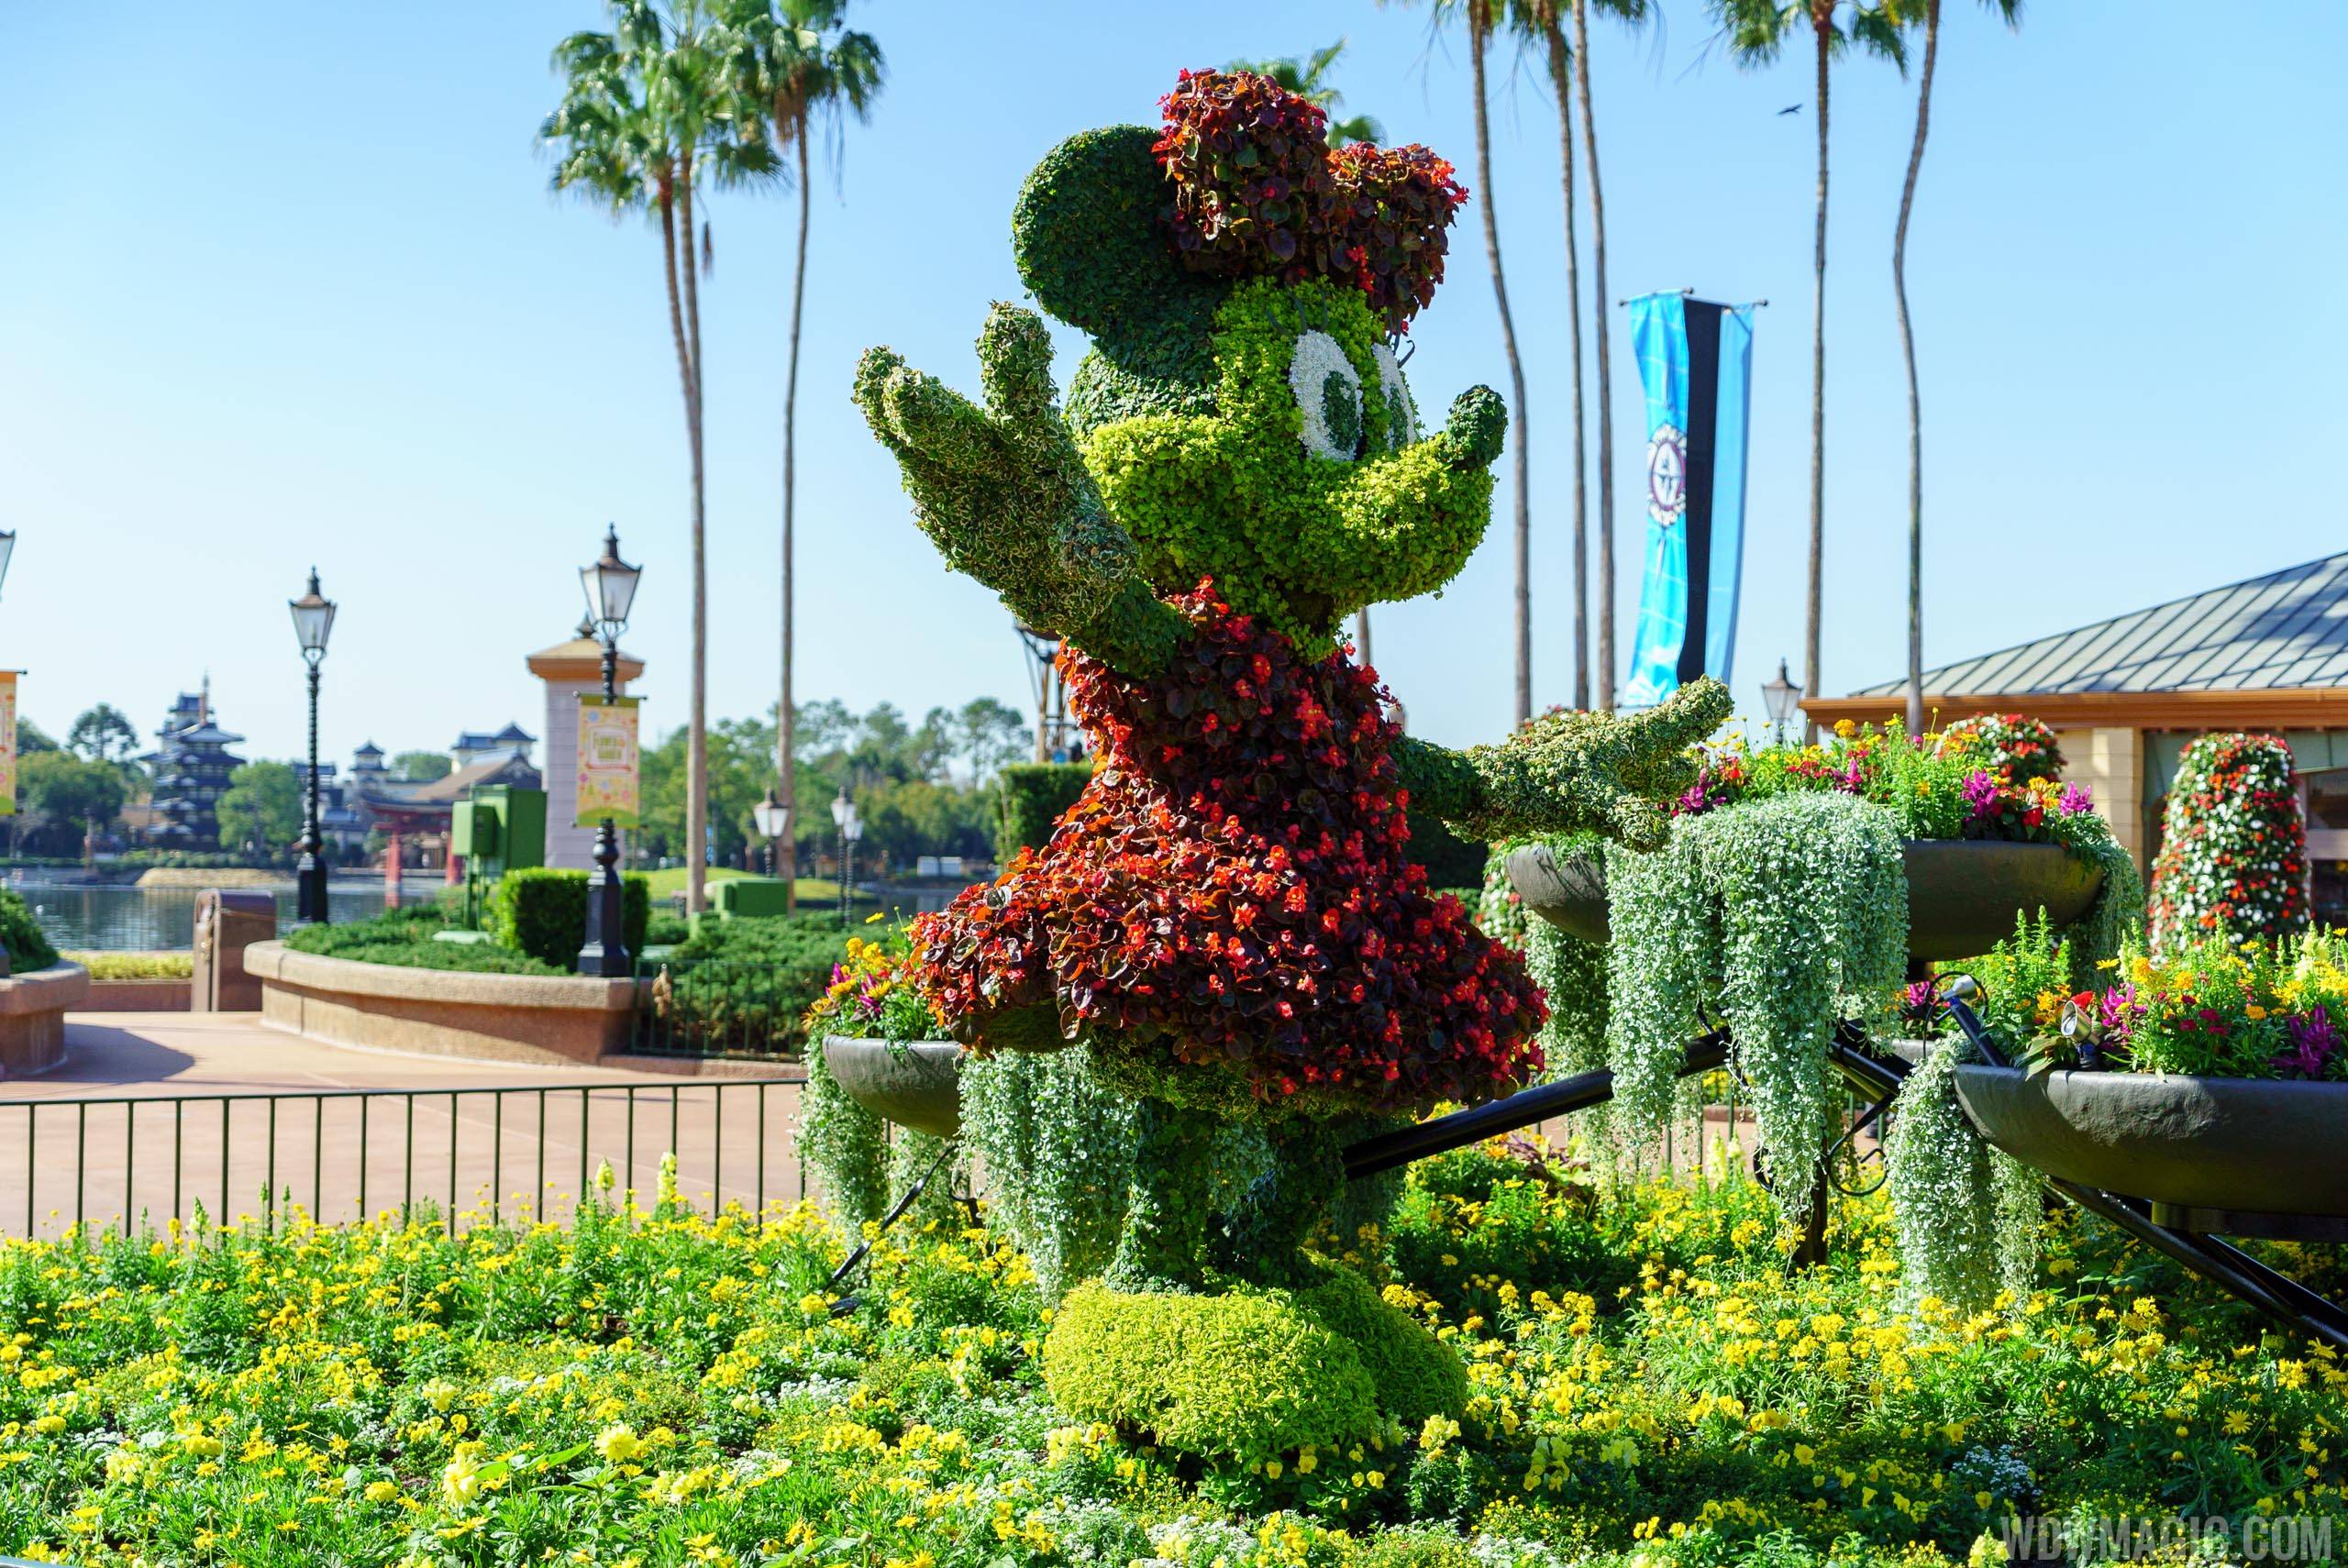 2016 Epcot International Flower and Garden Festival - Minnie Mouse topiary